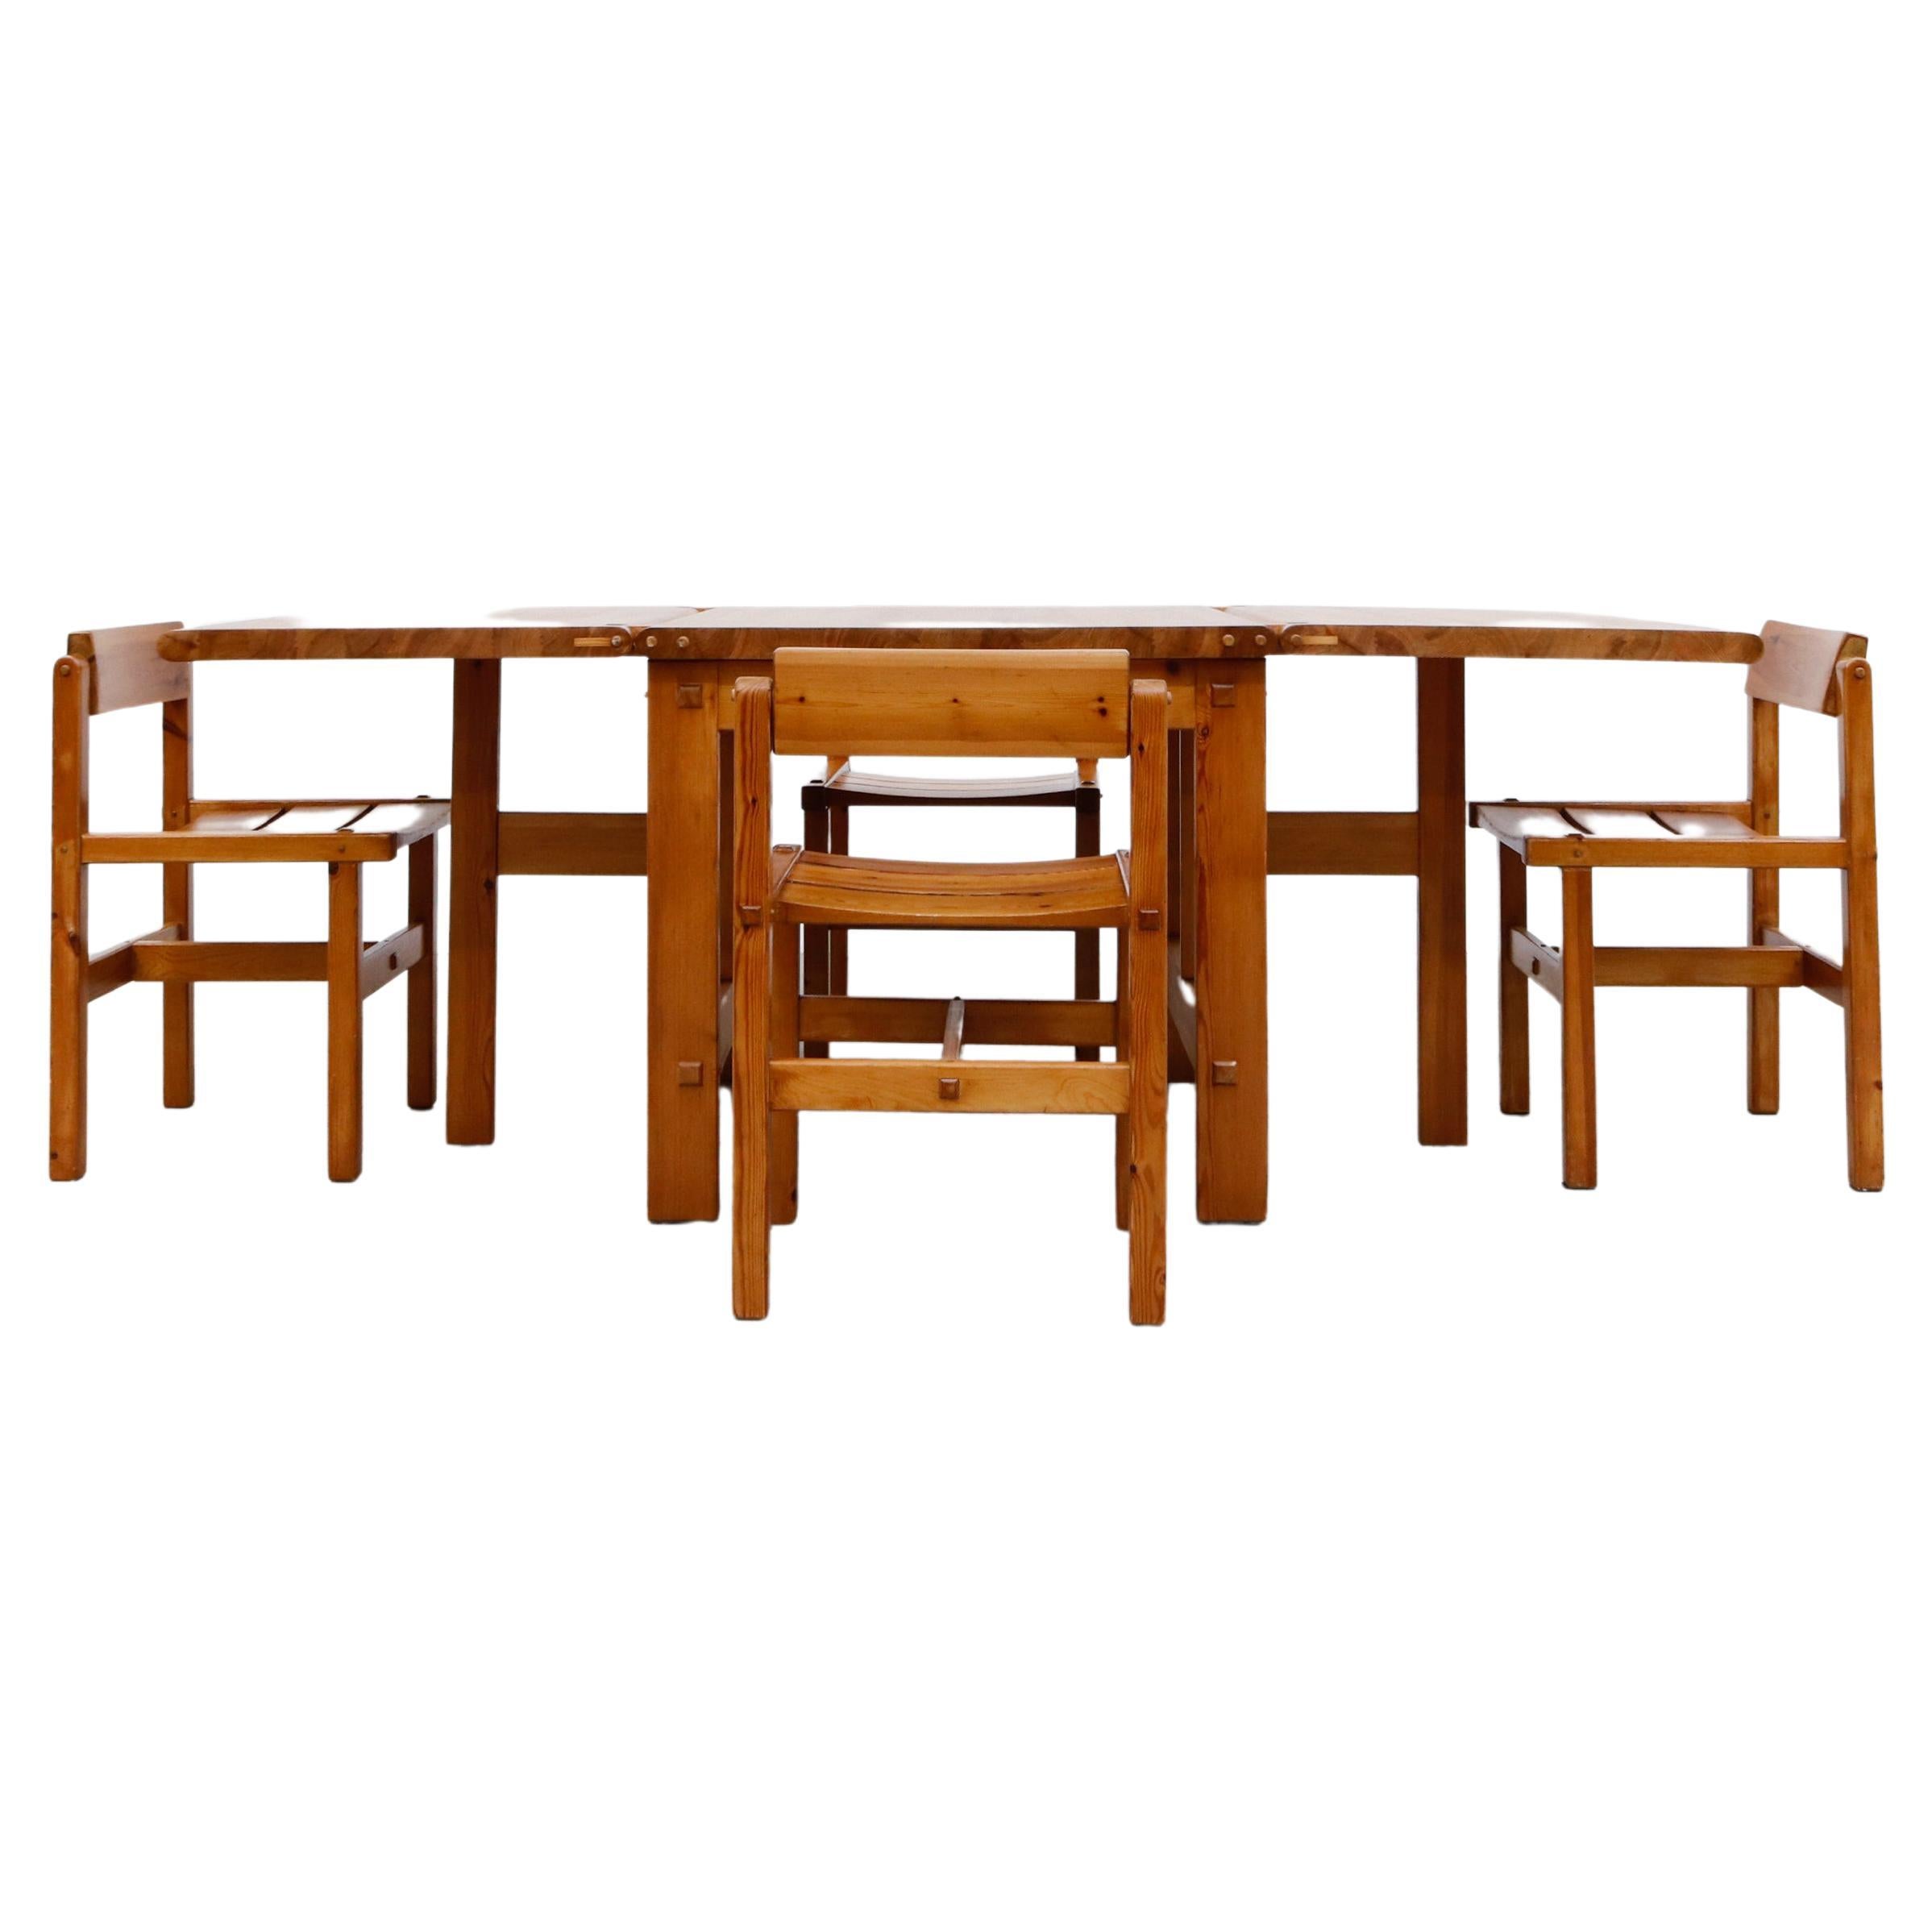 Heavy Pine “Trybo” Dining Set by Edvin Helseth